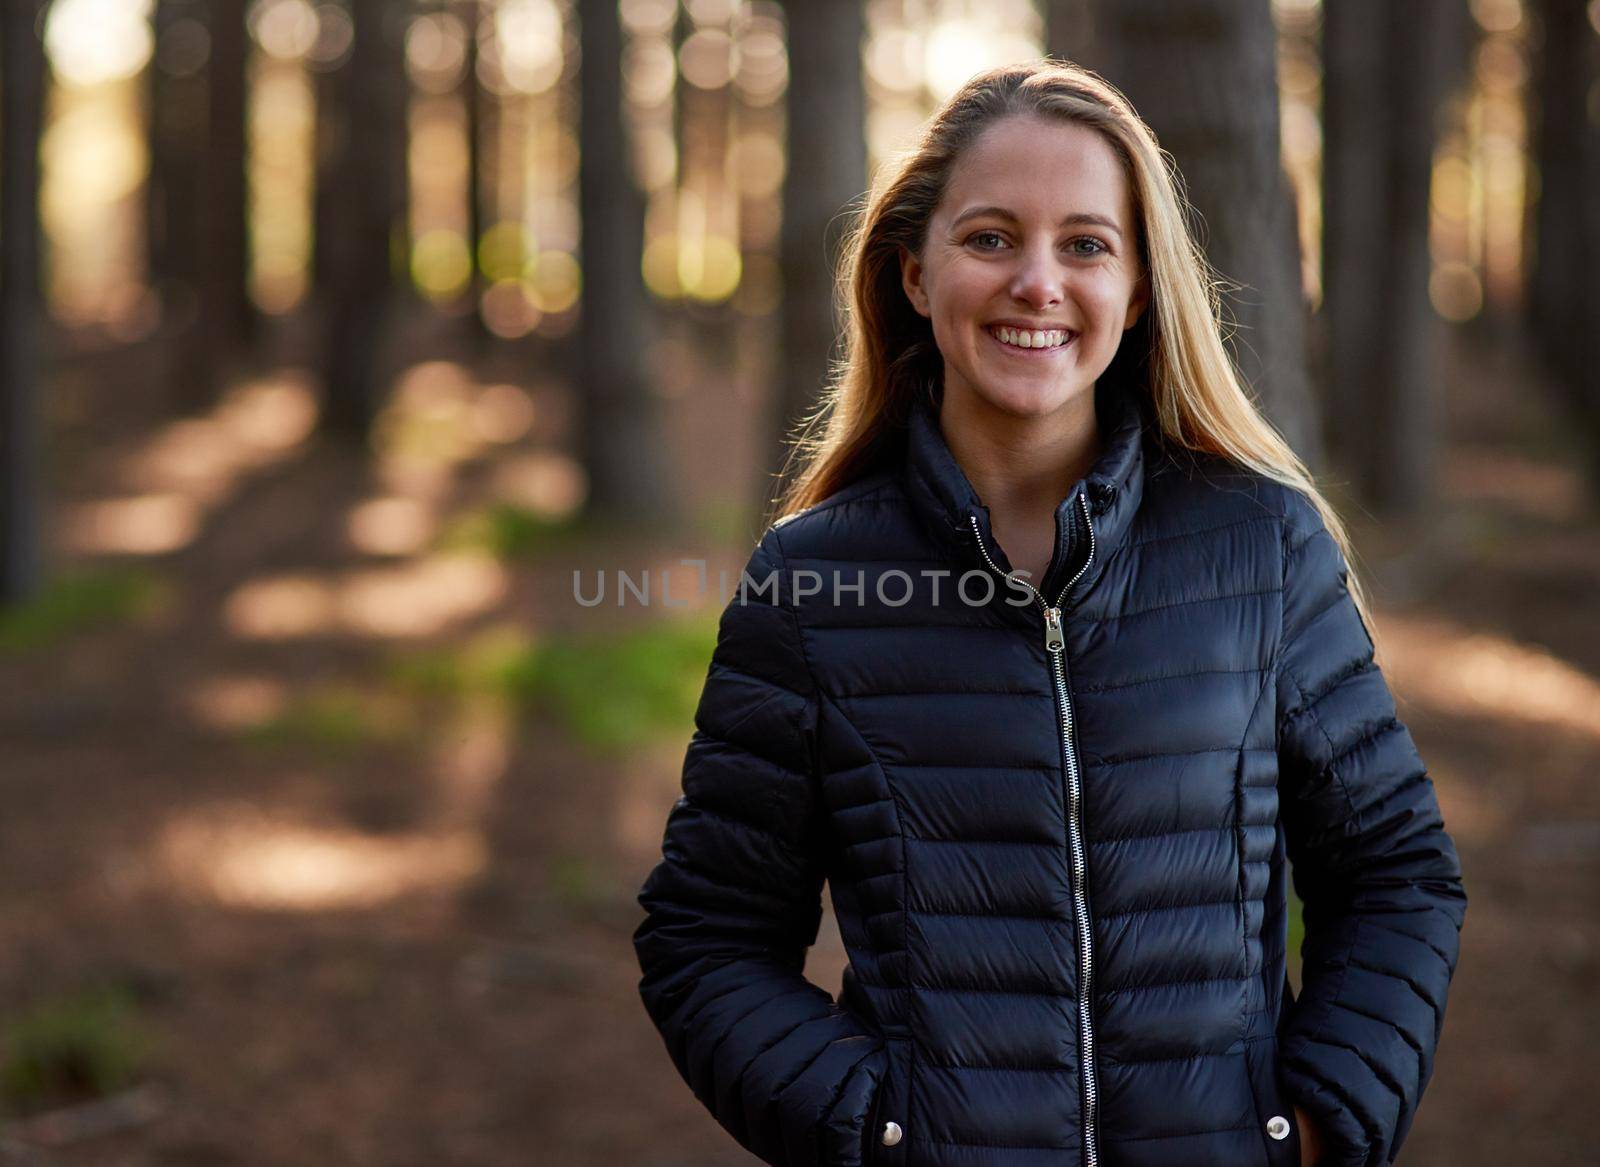 Portrait of a happy young woman exploring a forest on her own.